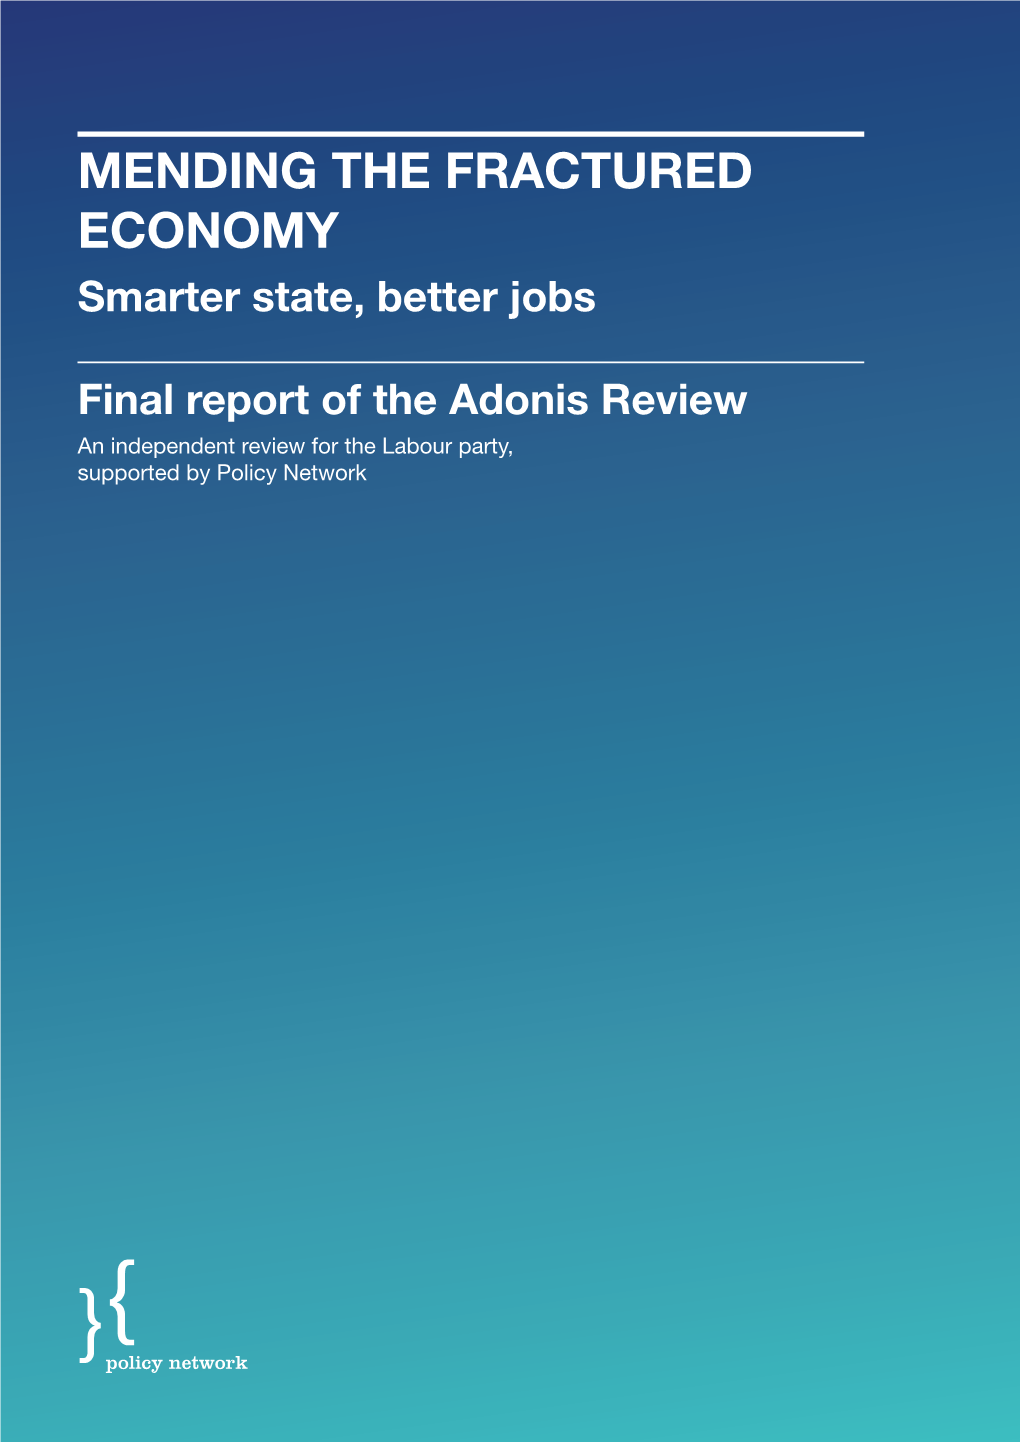 Adonis Review an Independent Review for the Labour Party, Supported by Policy Network Contents